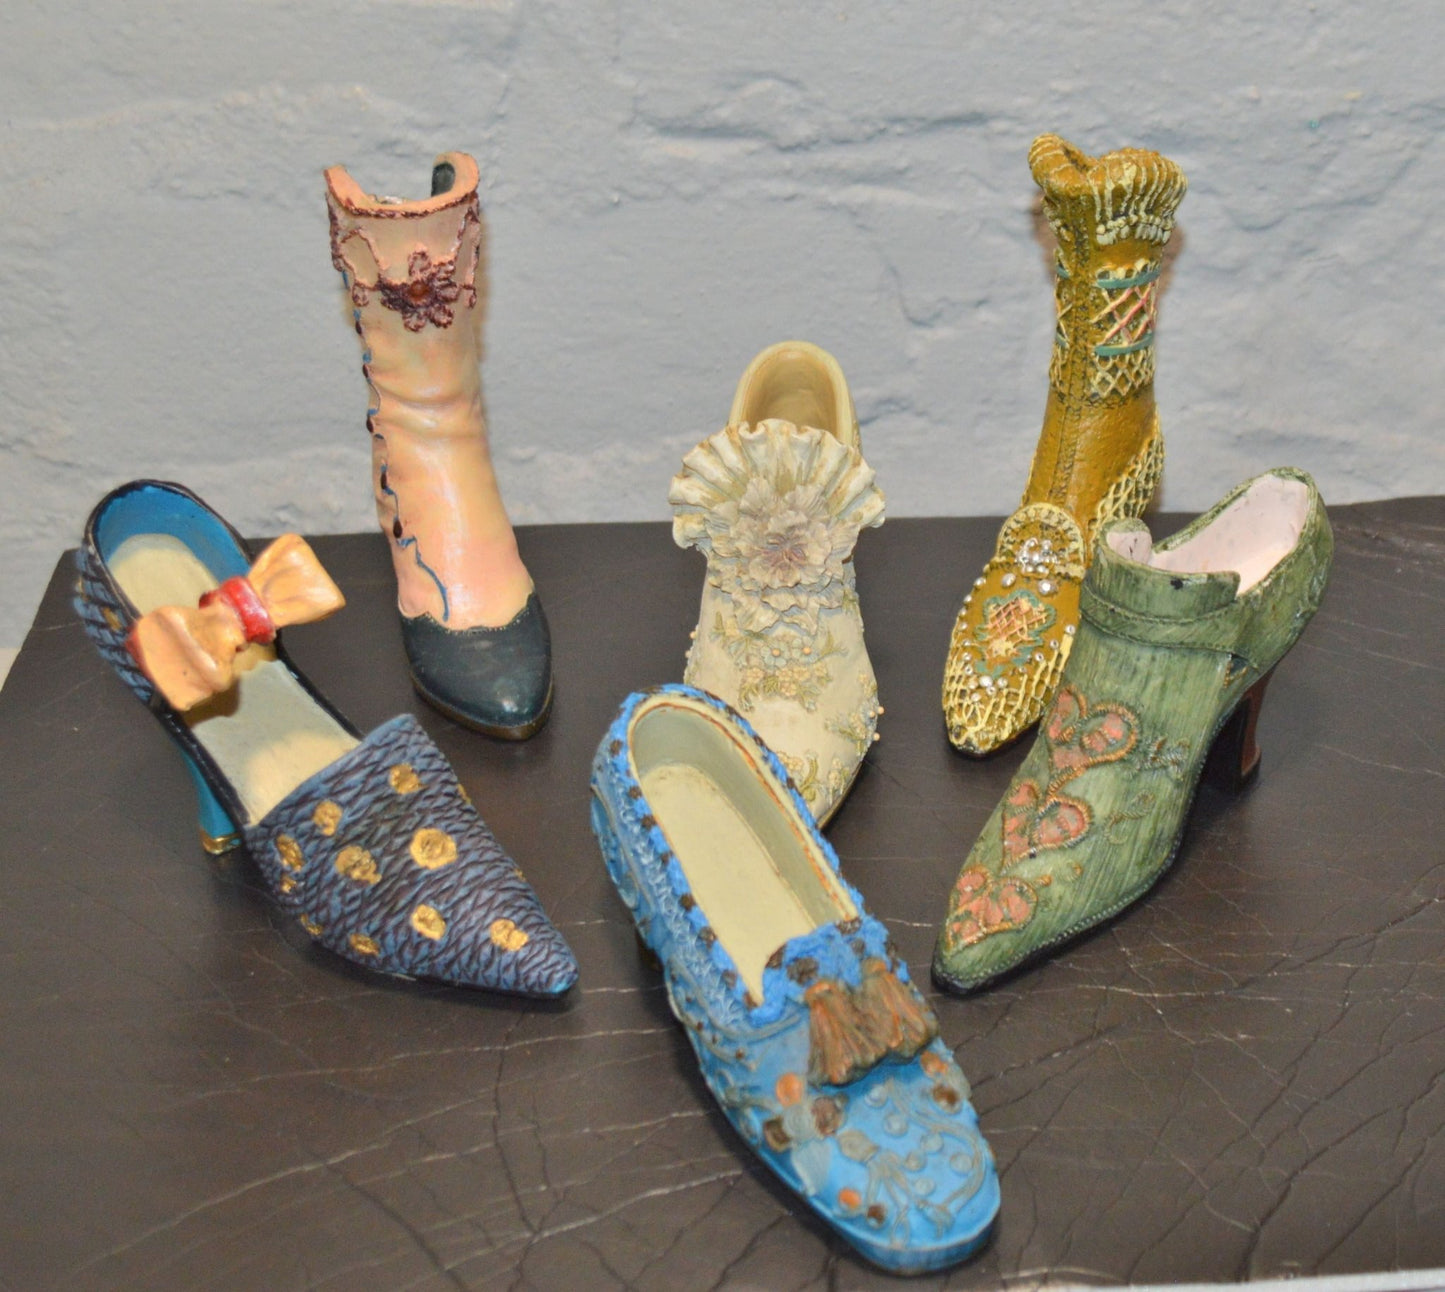 COLLECTION OF FOUR ORNAMENTAL SHOES AND TWO ORNAMENTAL BOOTS(PREVIOUSLY OWNED) GOOD CONDITION - TMD167207